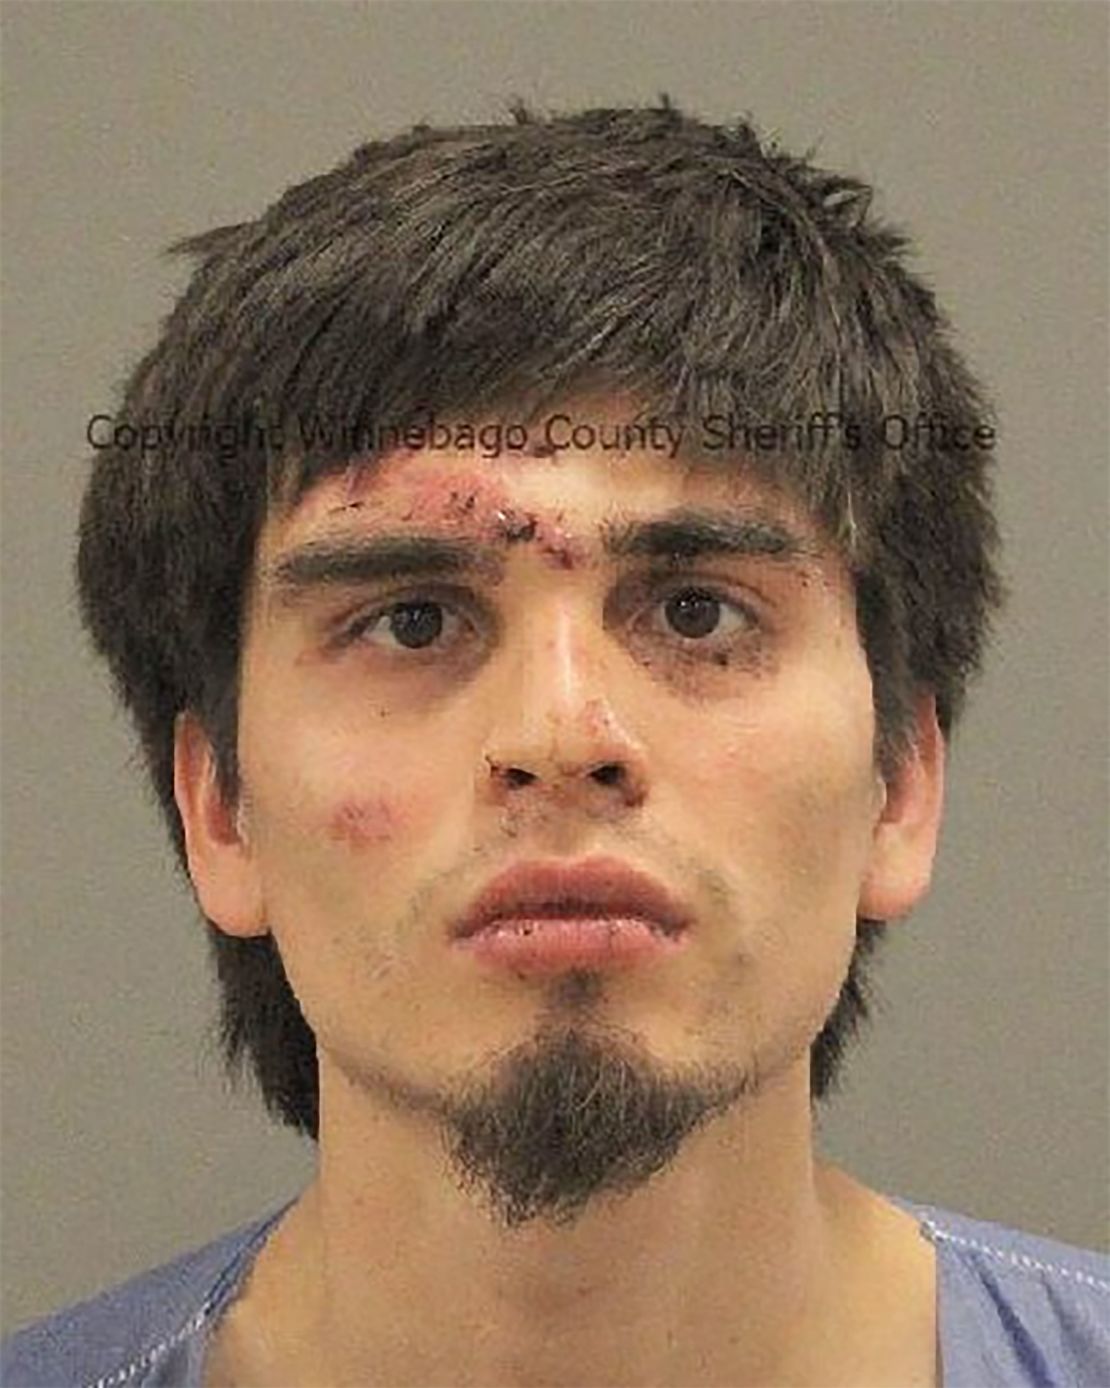 Christian Soto, 22, is in custody and facing four counts of first-degree murder, among other charges, according to prosecutors. The Winnebago County Sheriff’s Office overlayed text on this image.